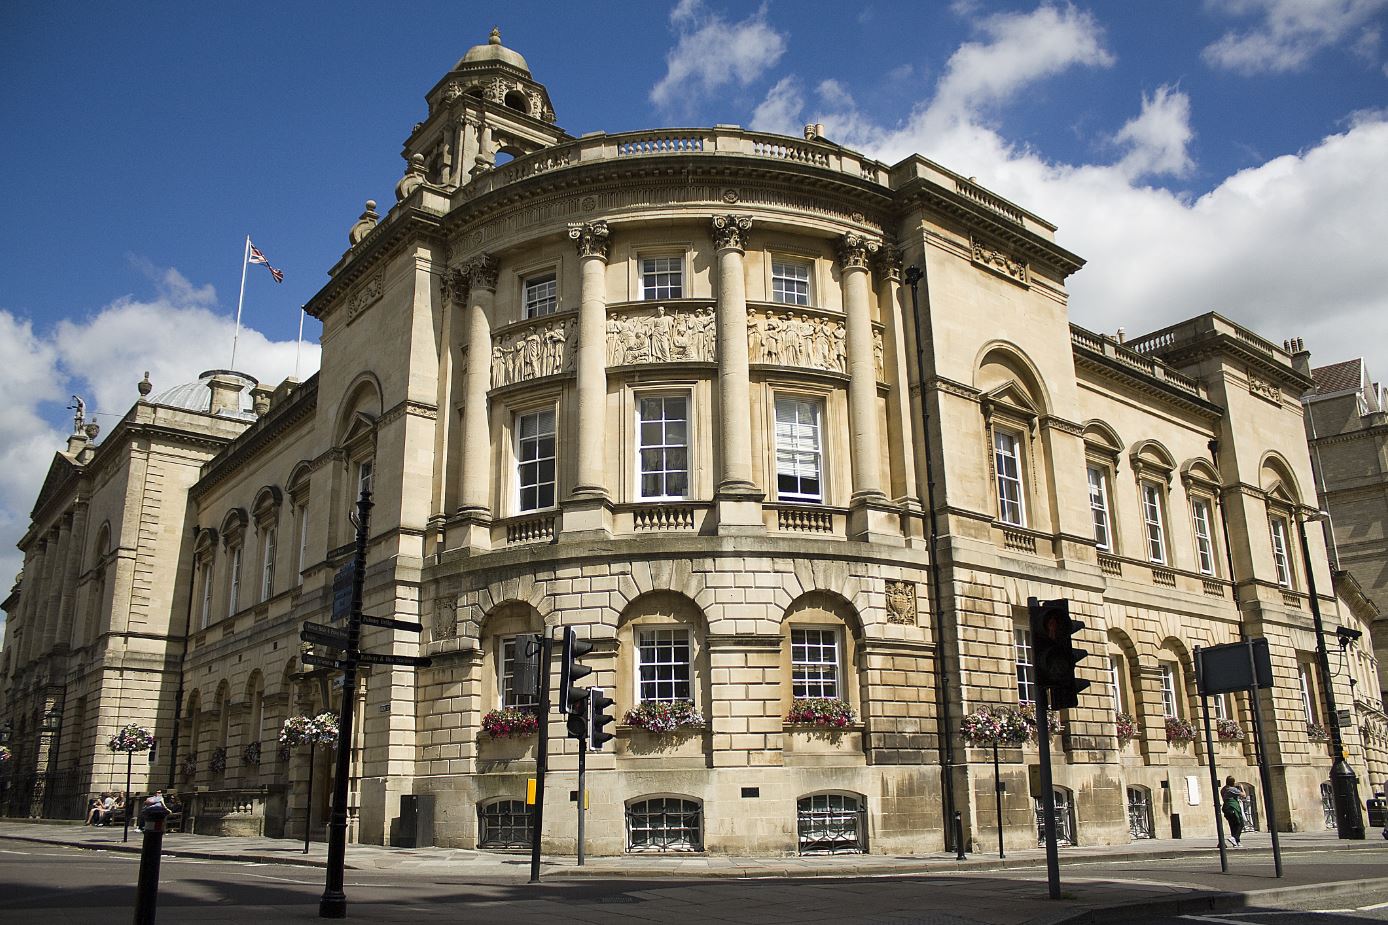 image shows the Guildhall, Bath